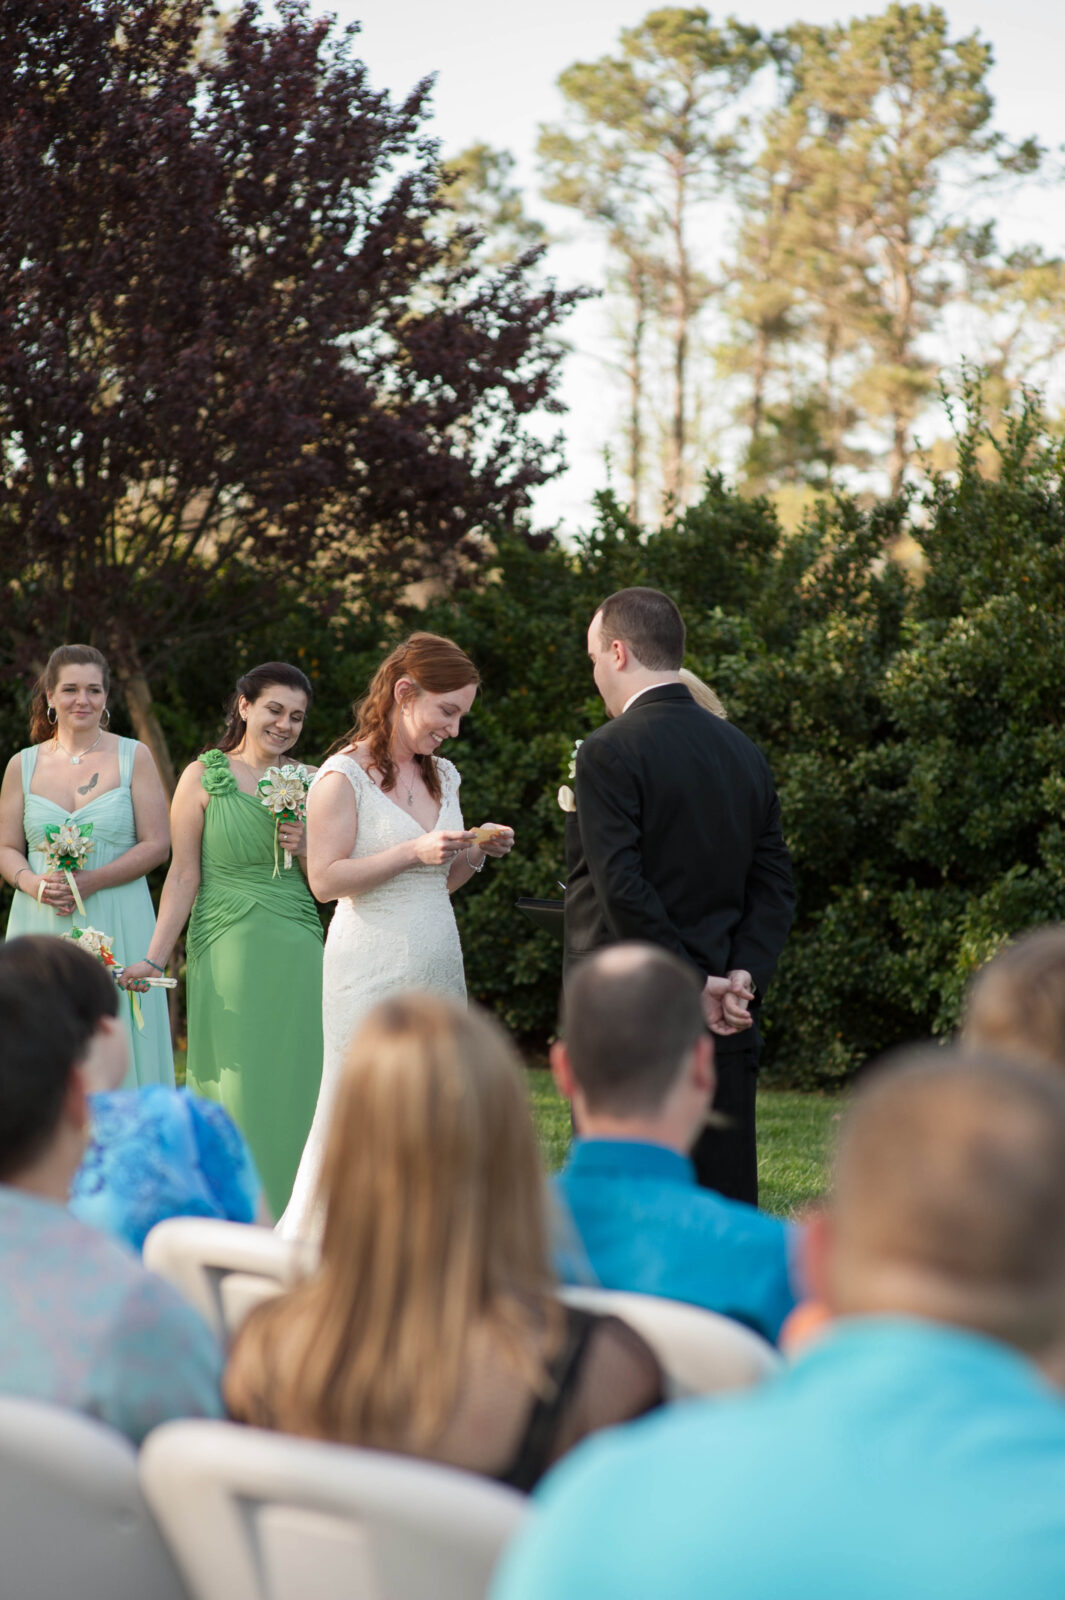 Bride smiles and laughs at her groom during their outdoor wedding ceremony